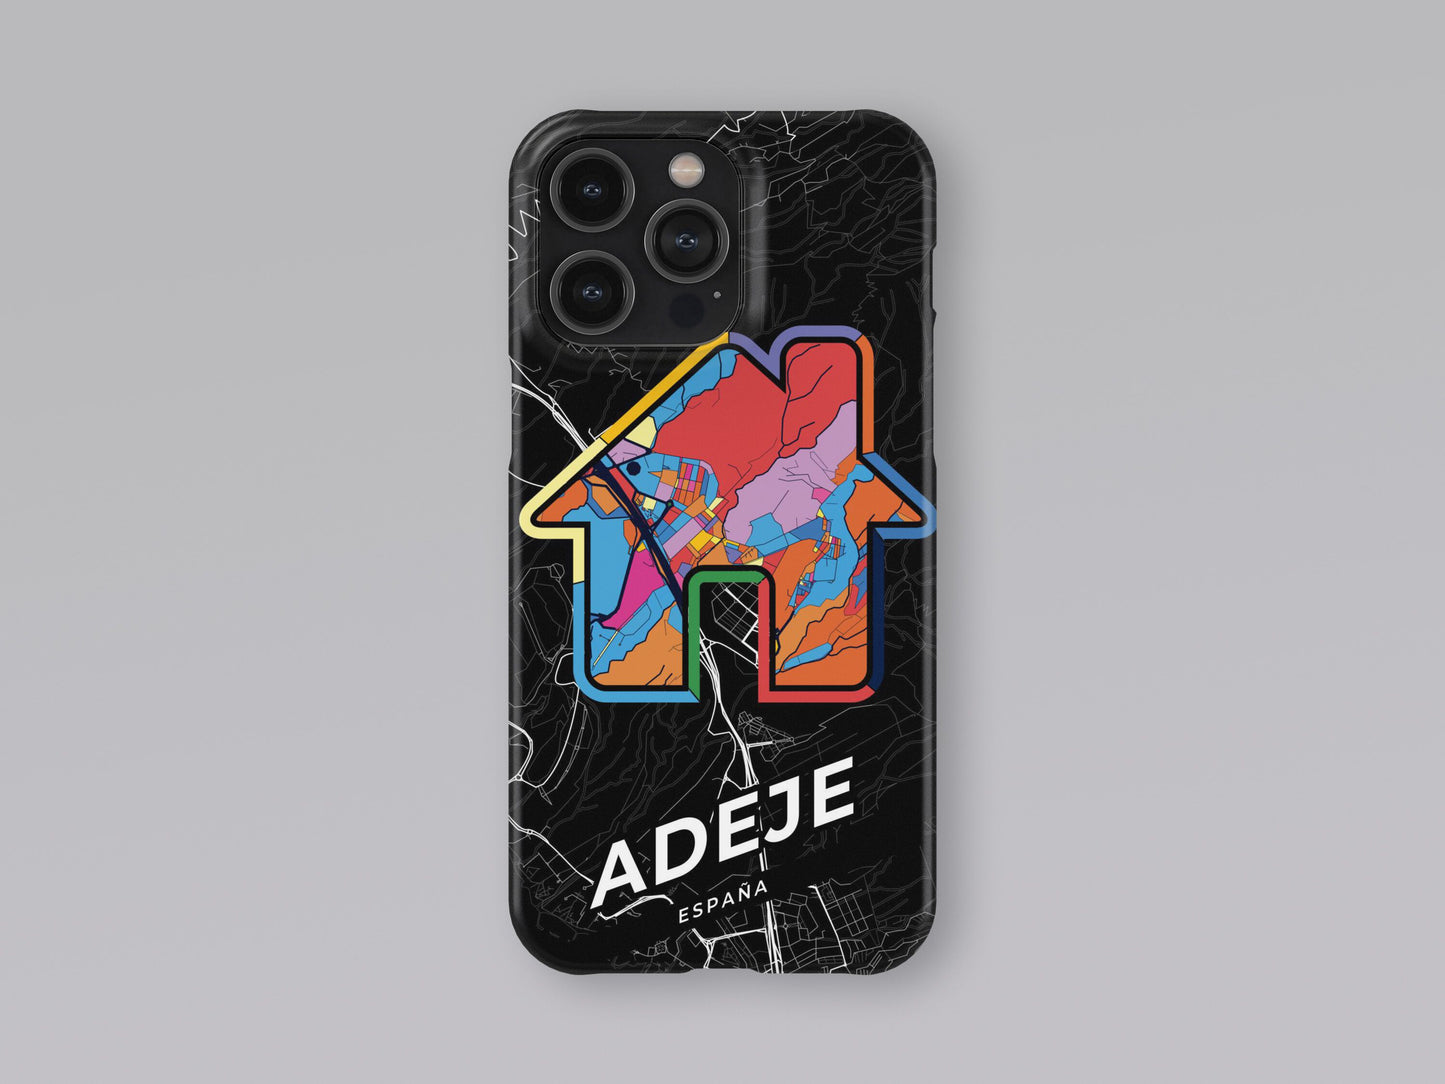 Adeje Spain slim phone case with colorful icon. Birthday, wedding or housewarming gift. Couple match cases. 3